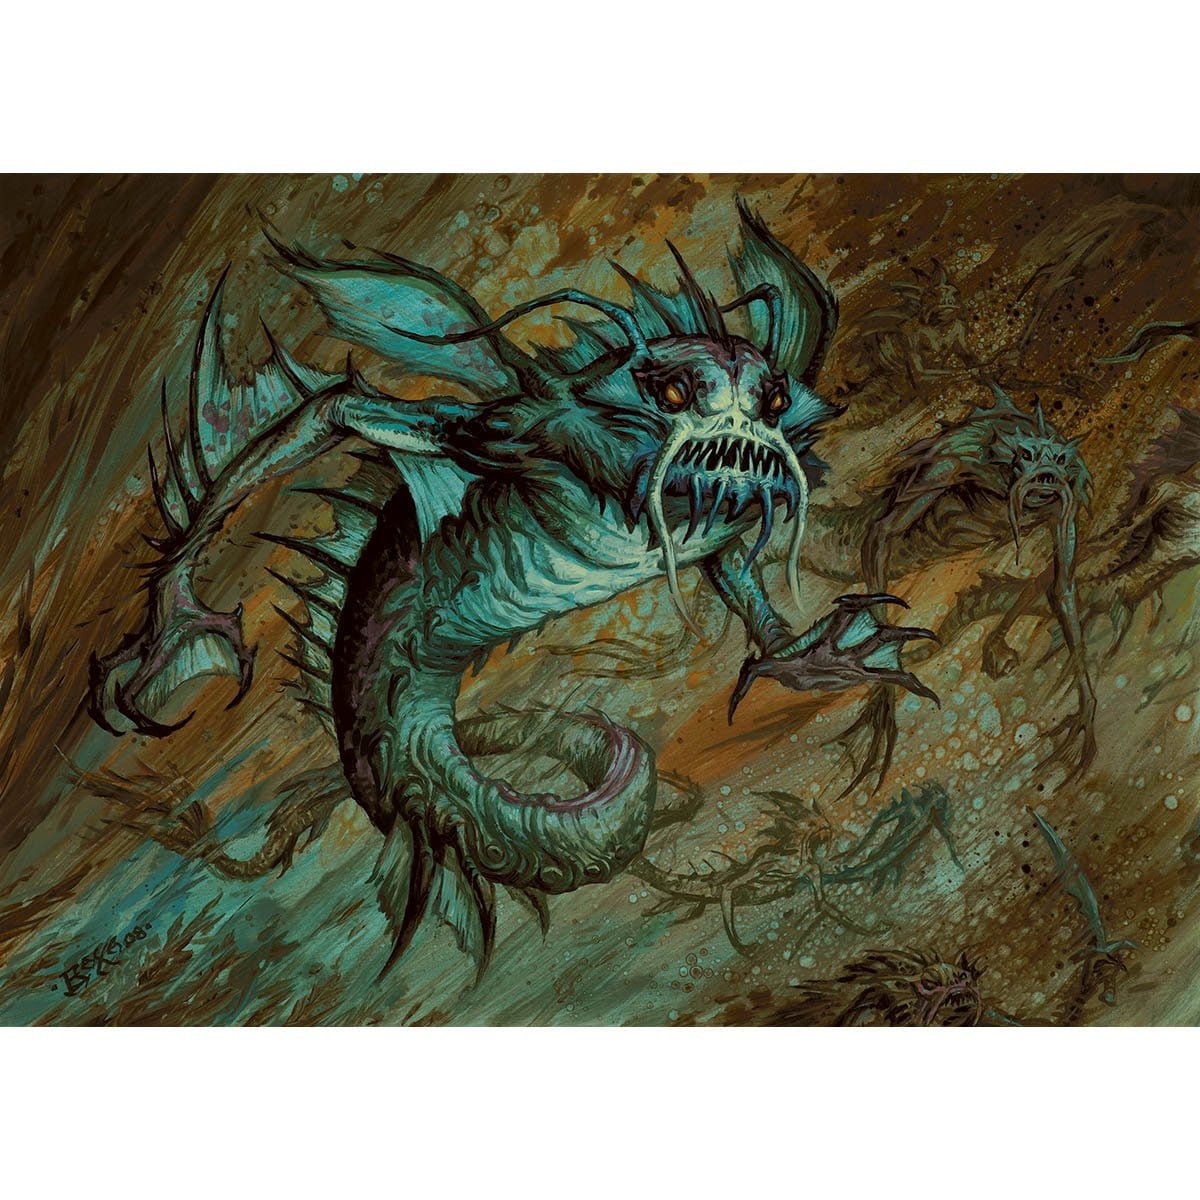 Merfolk Reejery Print - Print - Original Magic Art - Accessories for Magic the Gathering and other card games